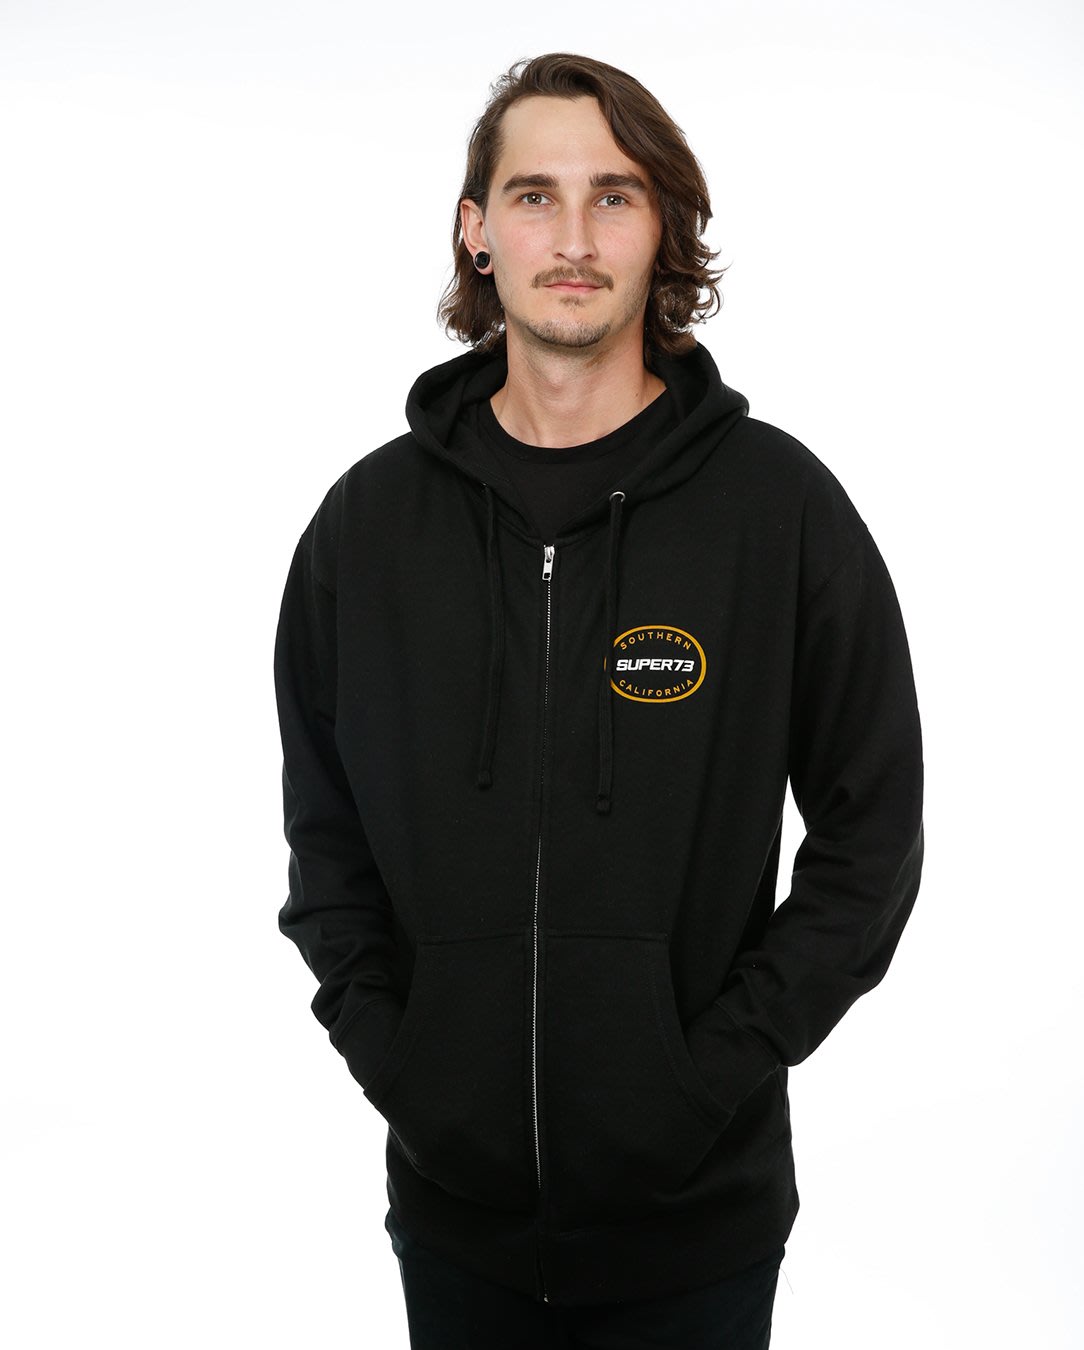 Front view of male model Oval Zip Up hoodie on white background 